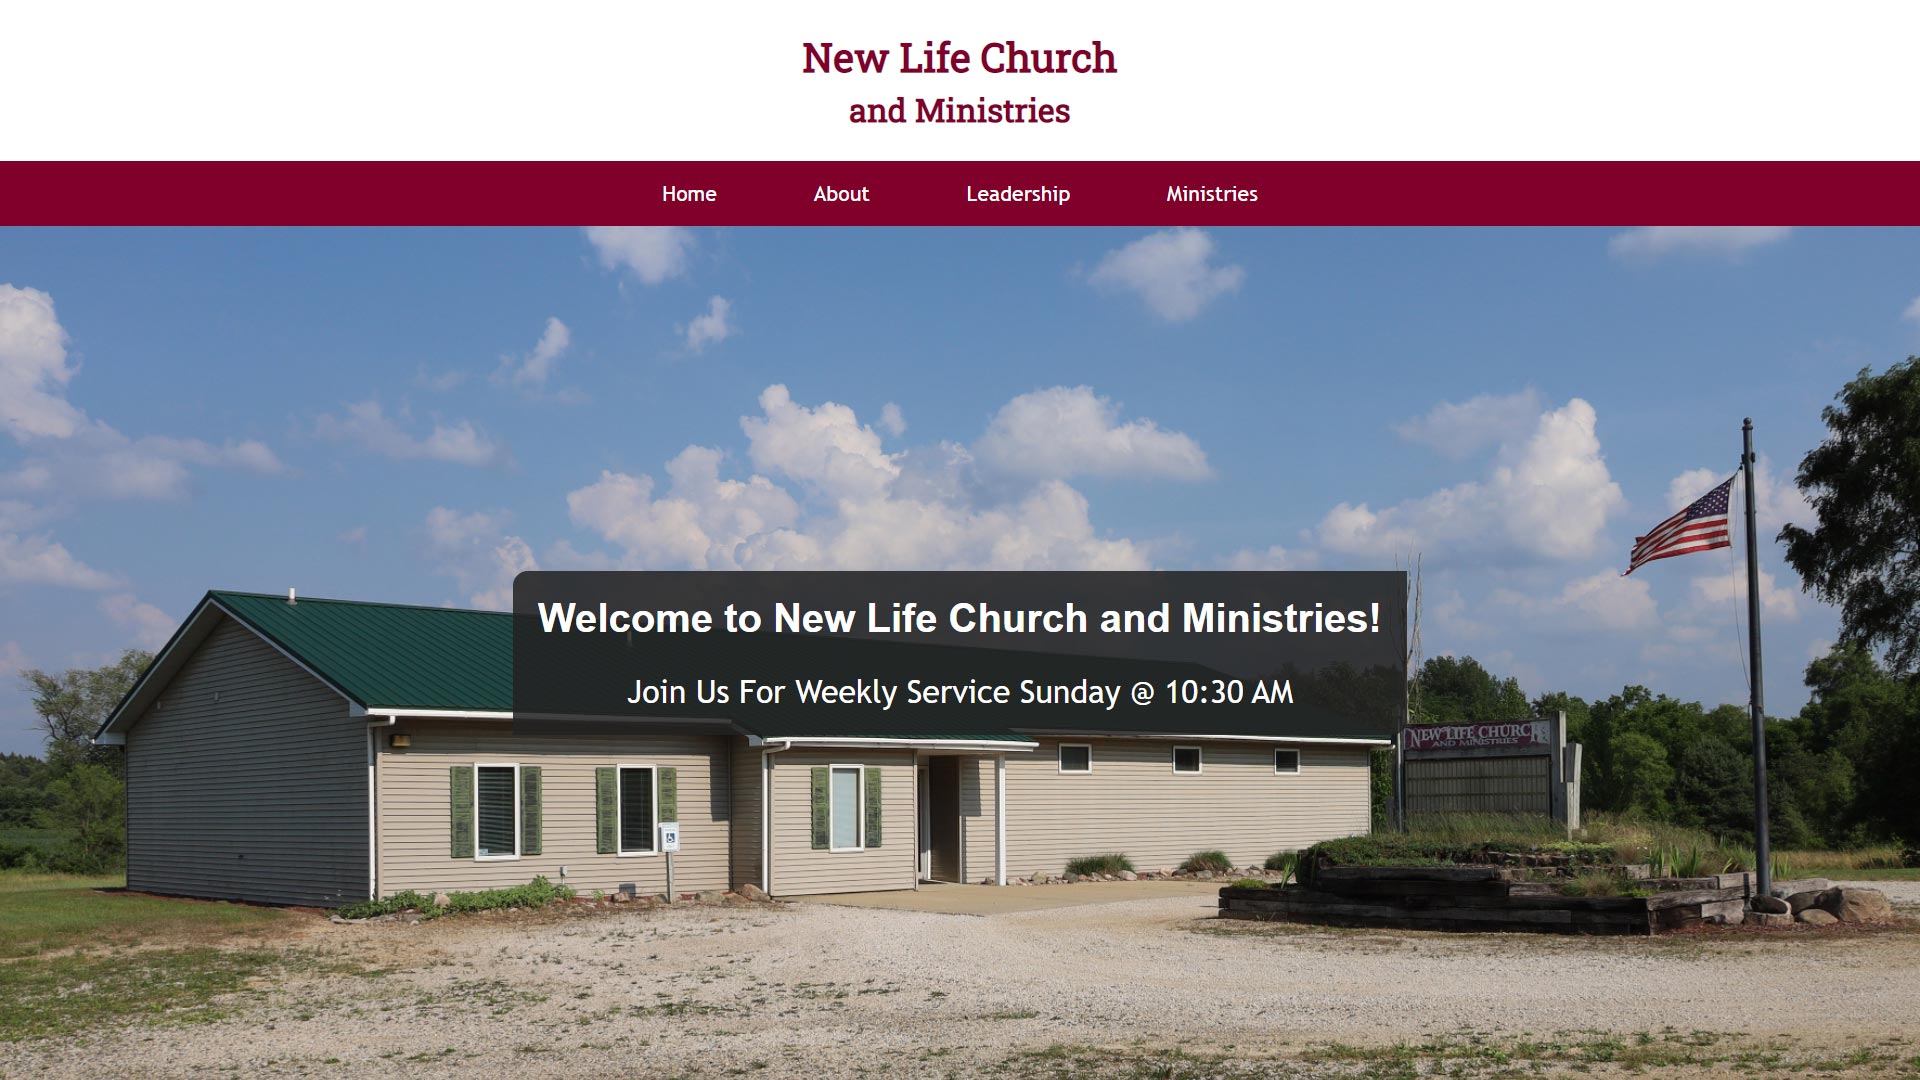 New Life Church and Ministries of Battle Creek